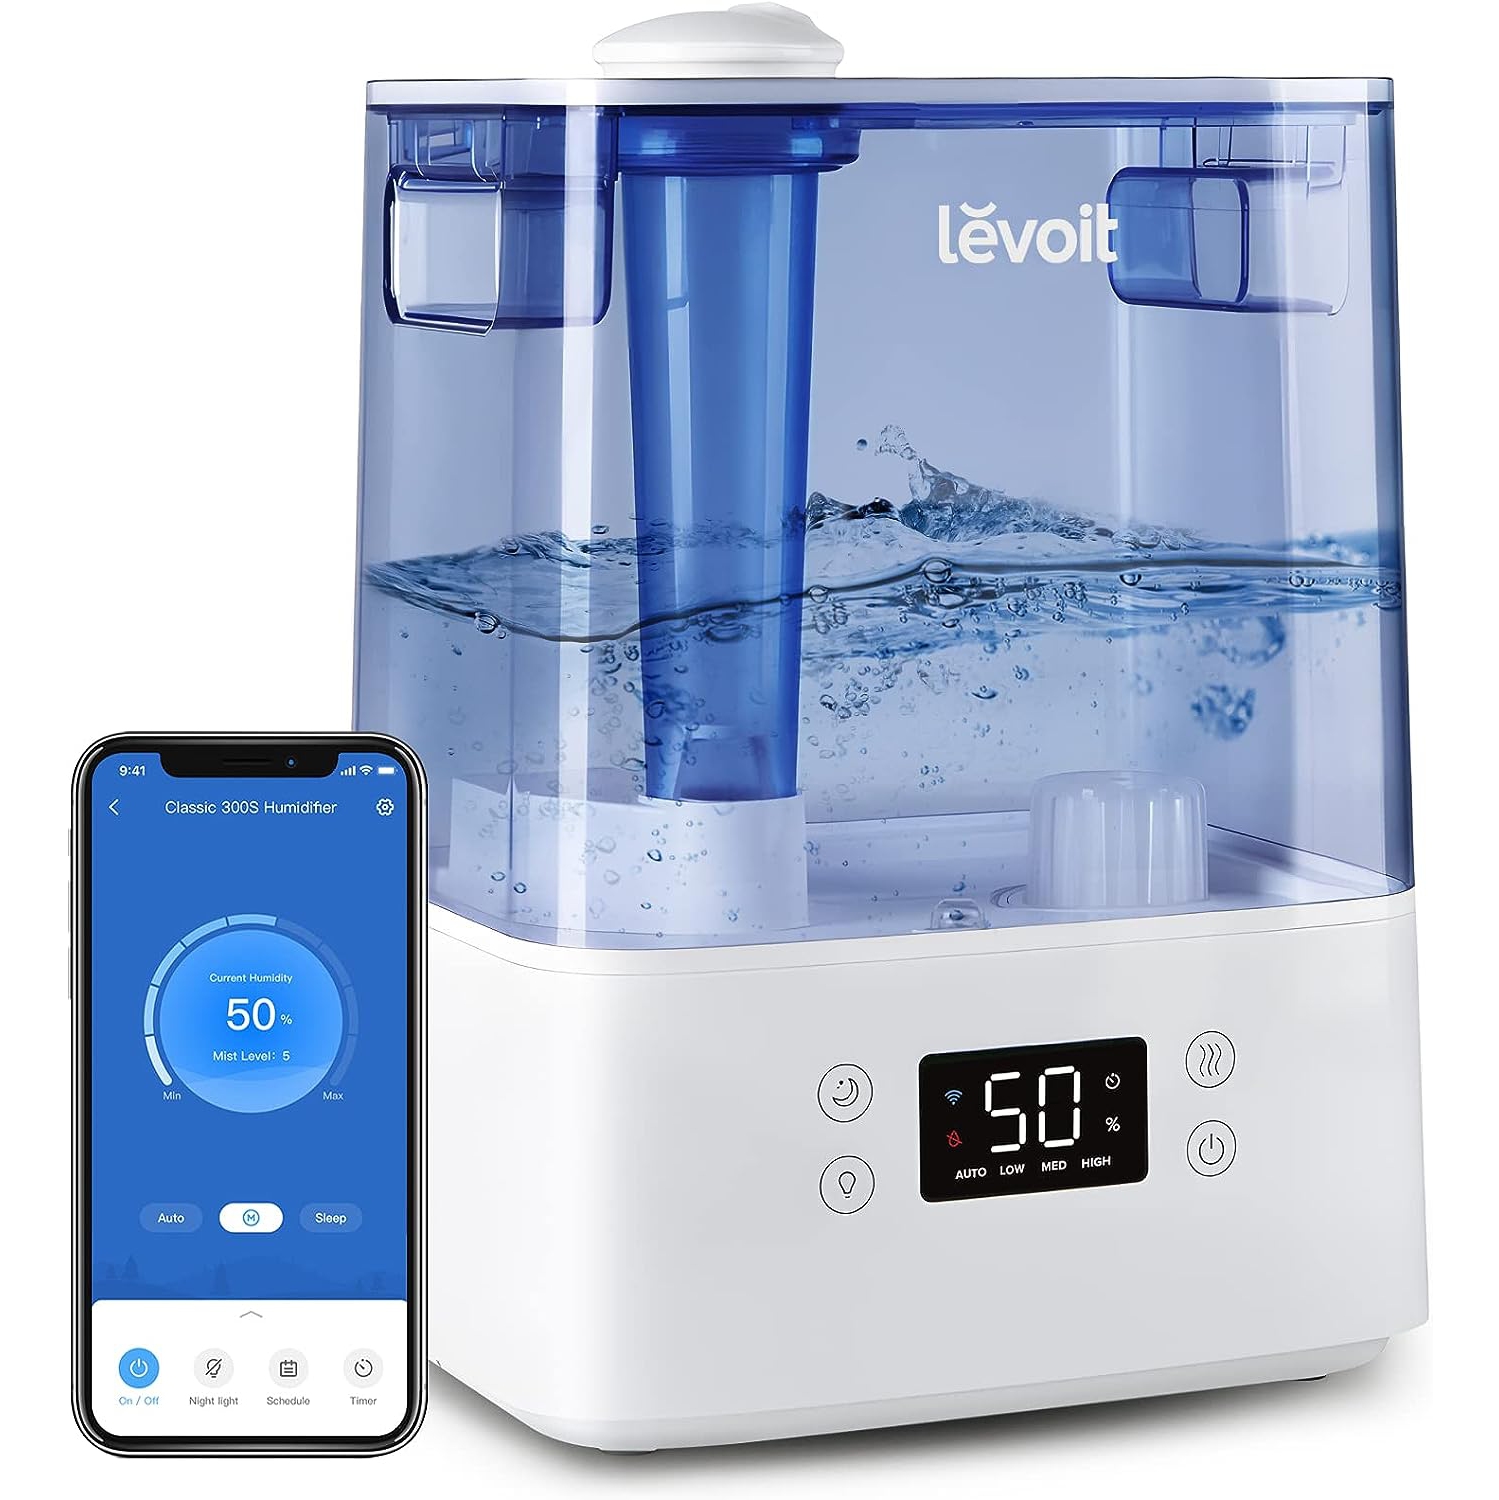 LEVOIT Humidifier for Bedroom Large Room Home, Smart WiFi Alexa Control, 6L Top Fill Cool Mist Humidifiers for Plants, Baby, Ultrasonic, Essential Oil Tray, Auto Mode, Night Light,